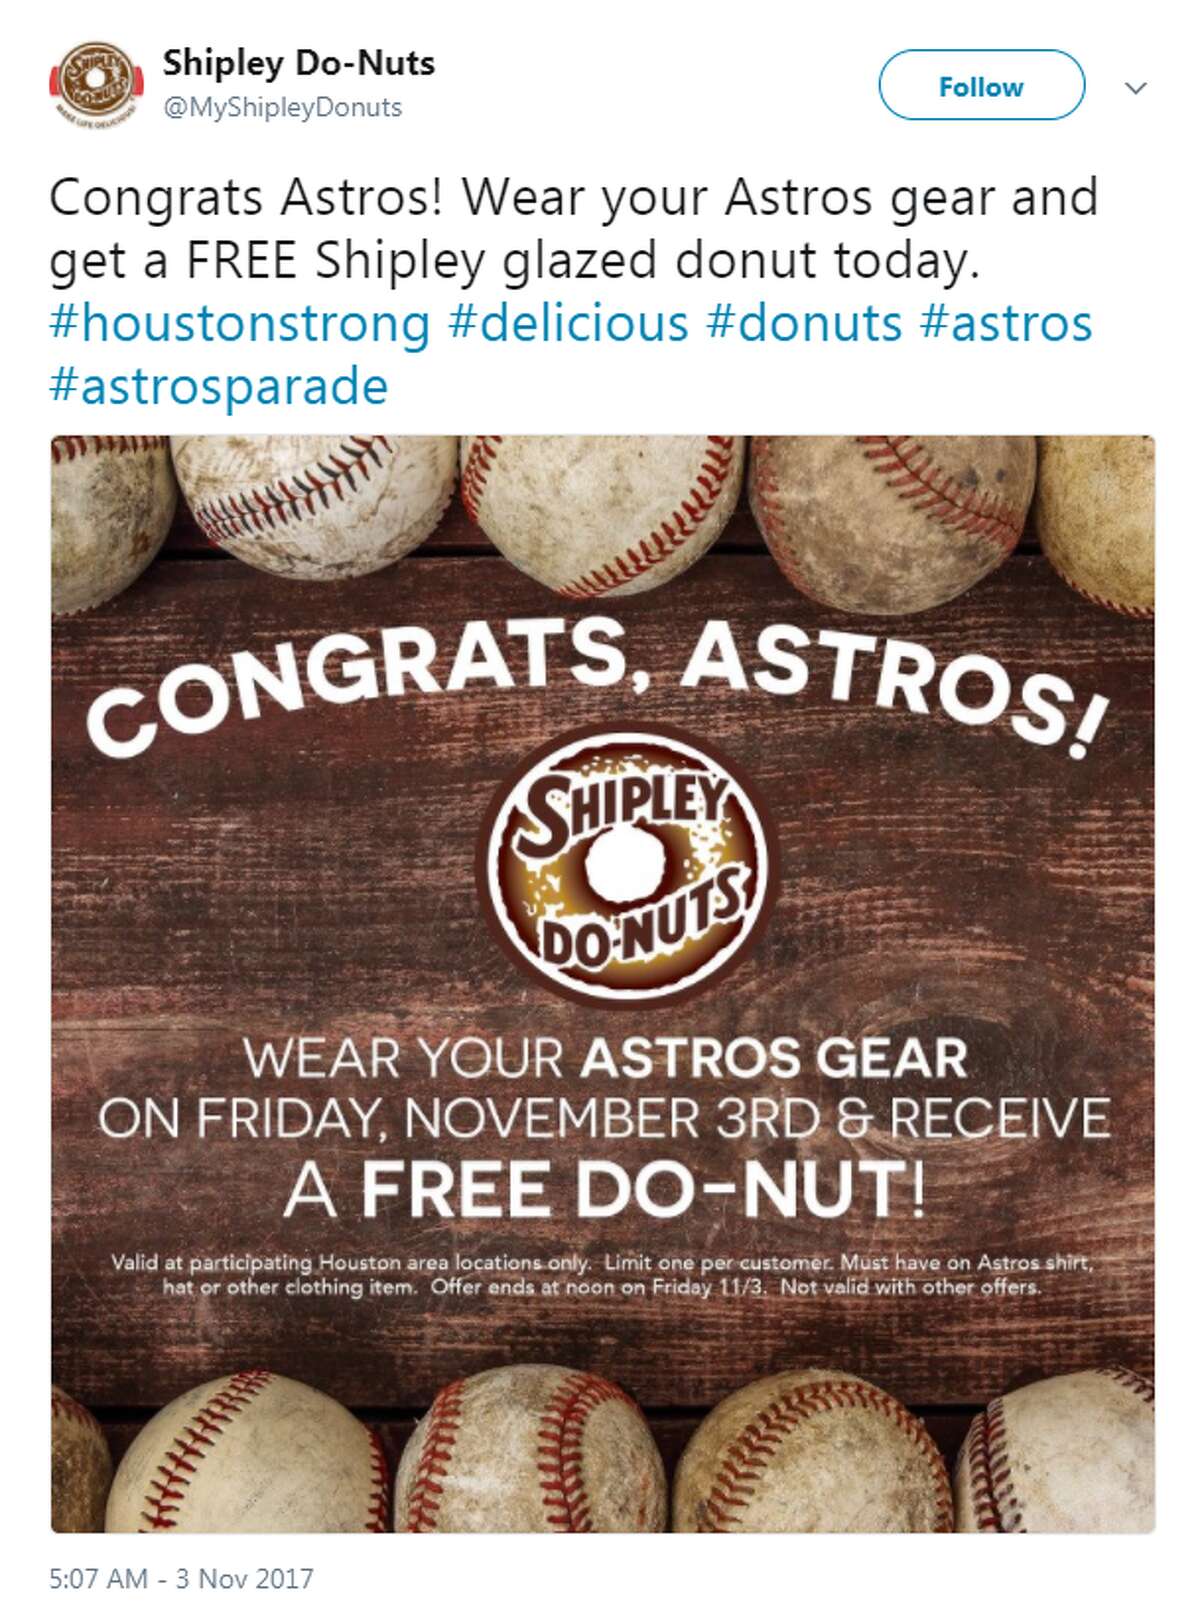 Wear your Astros gear to get a free donut